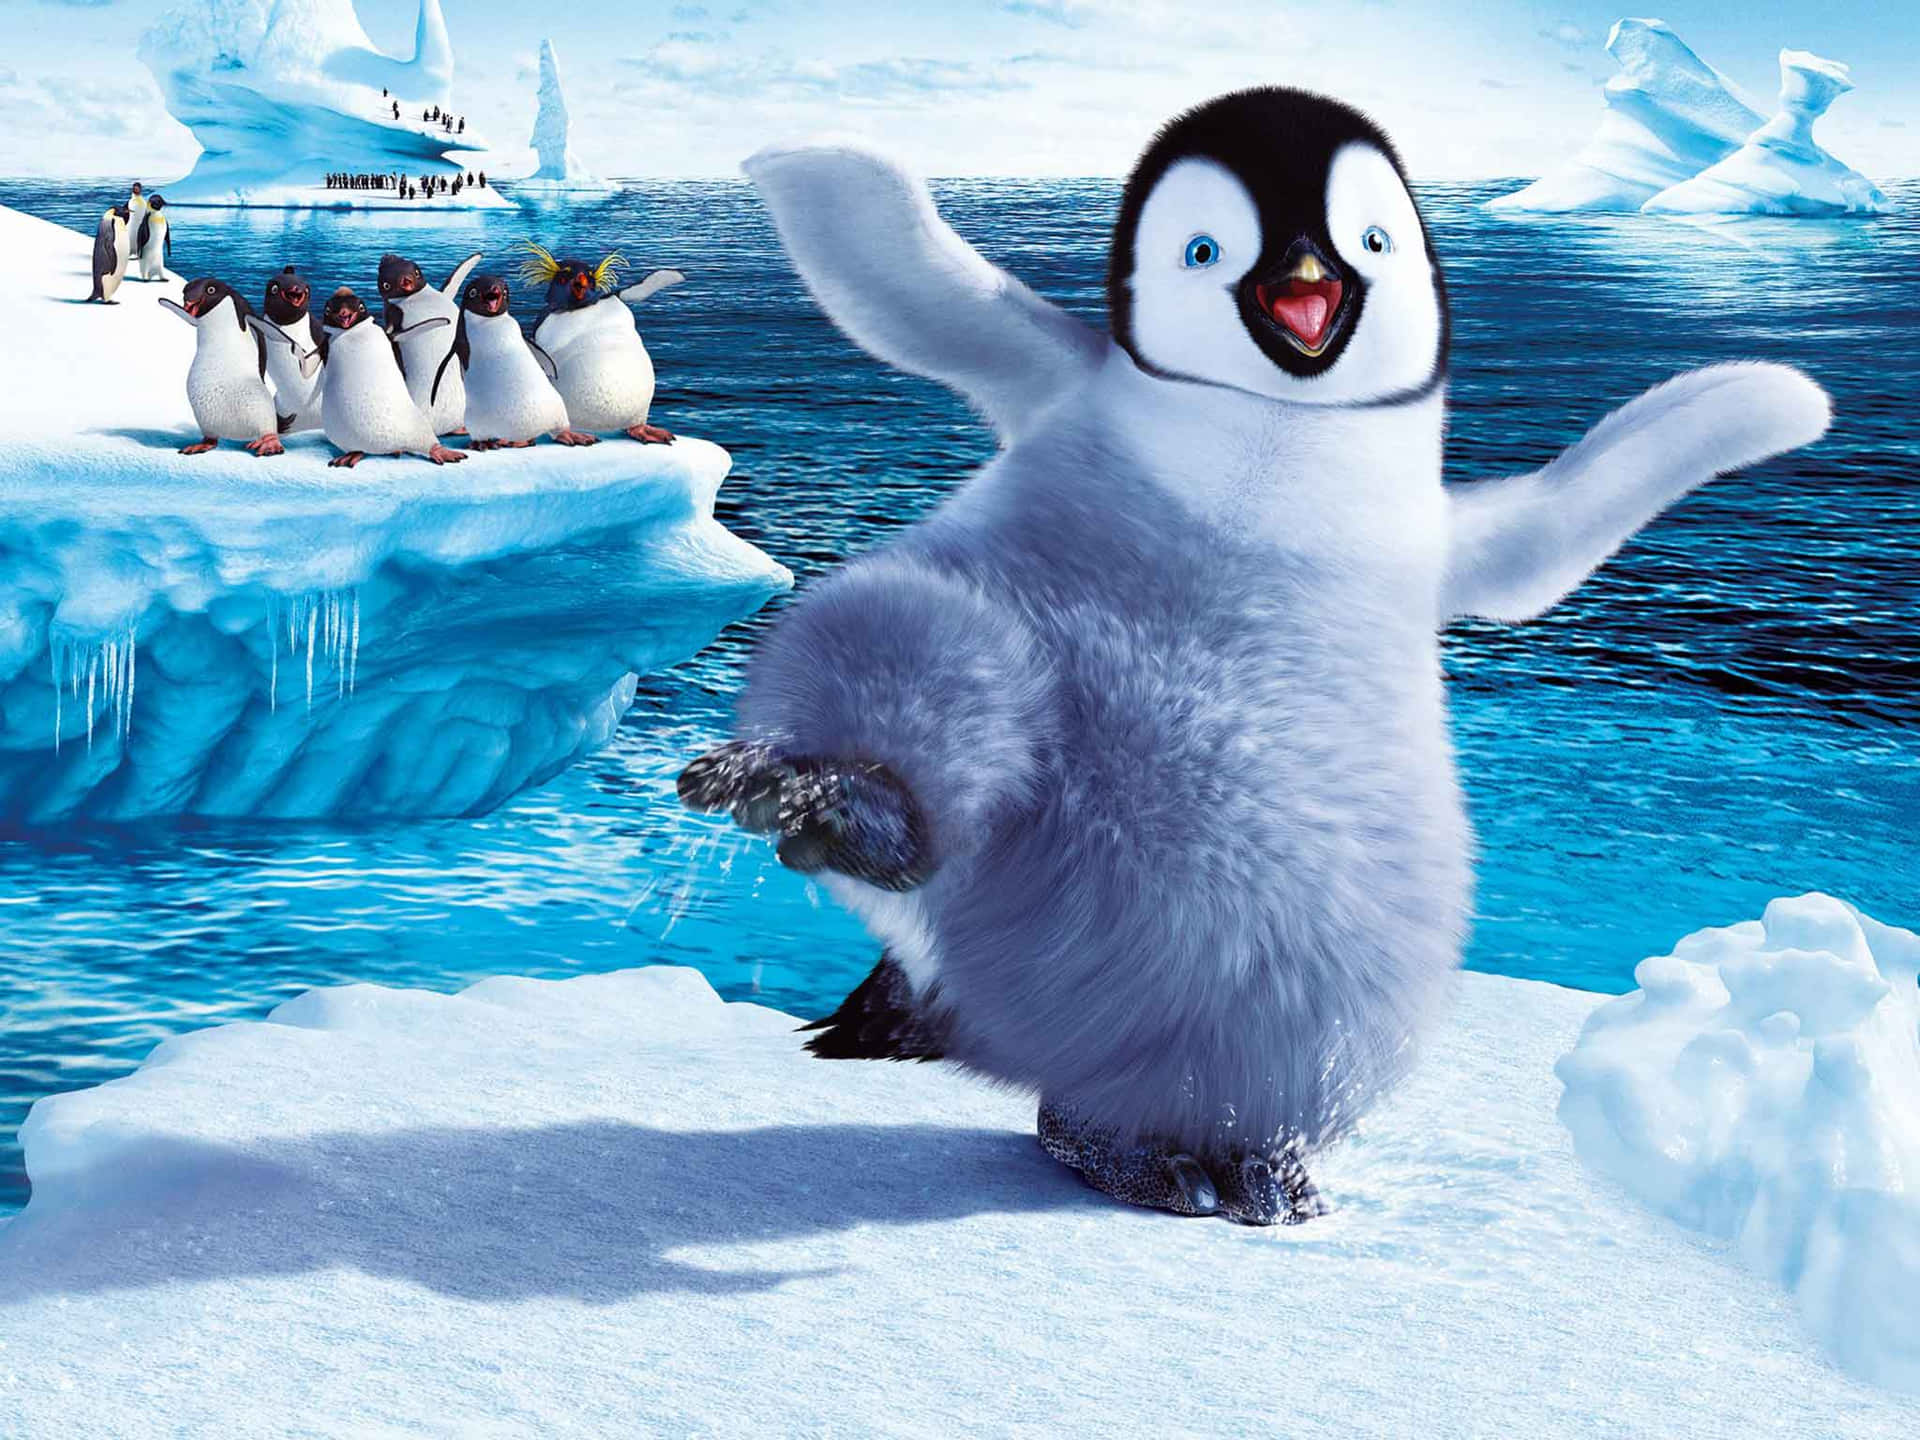 "It's All Fun and Games Until Someone Gets Penguined!"